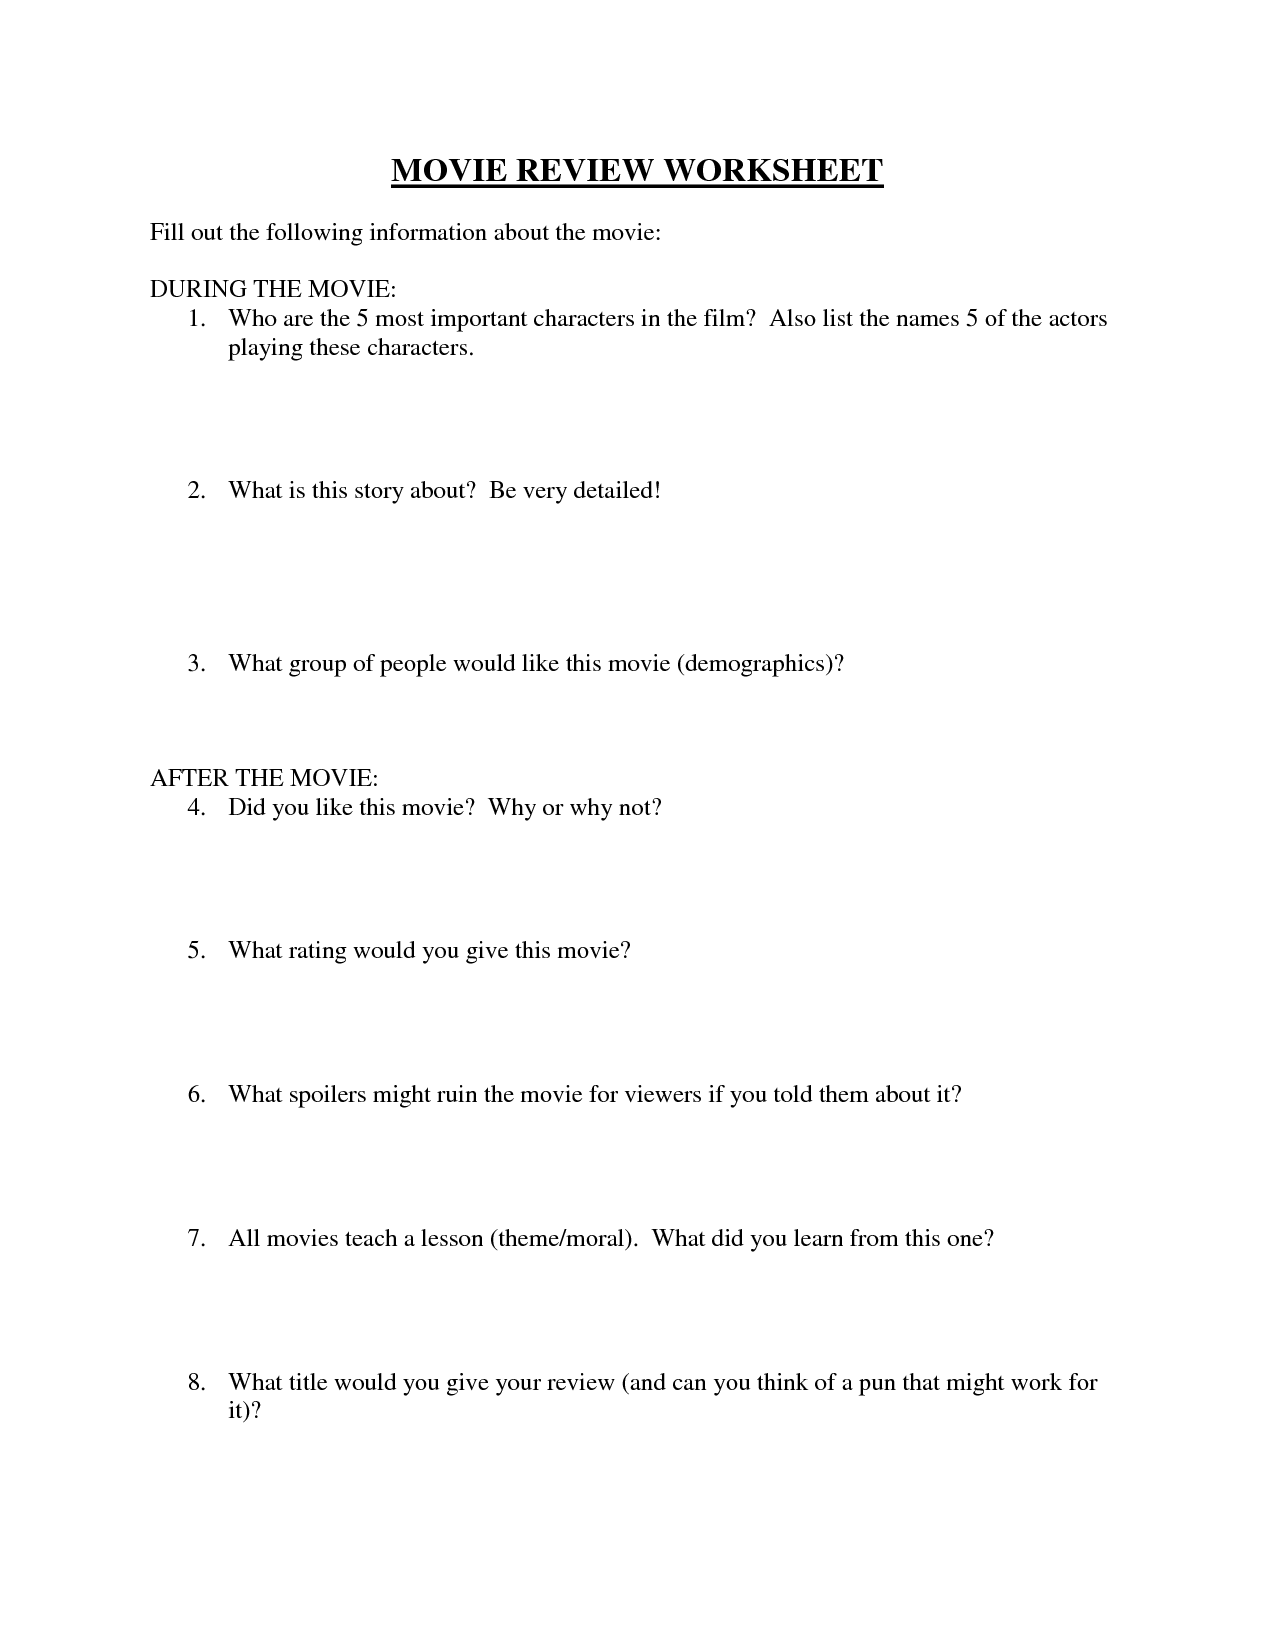 Movie-Review-Worksheet | High School English Lesson Plans